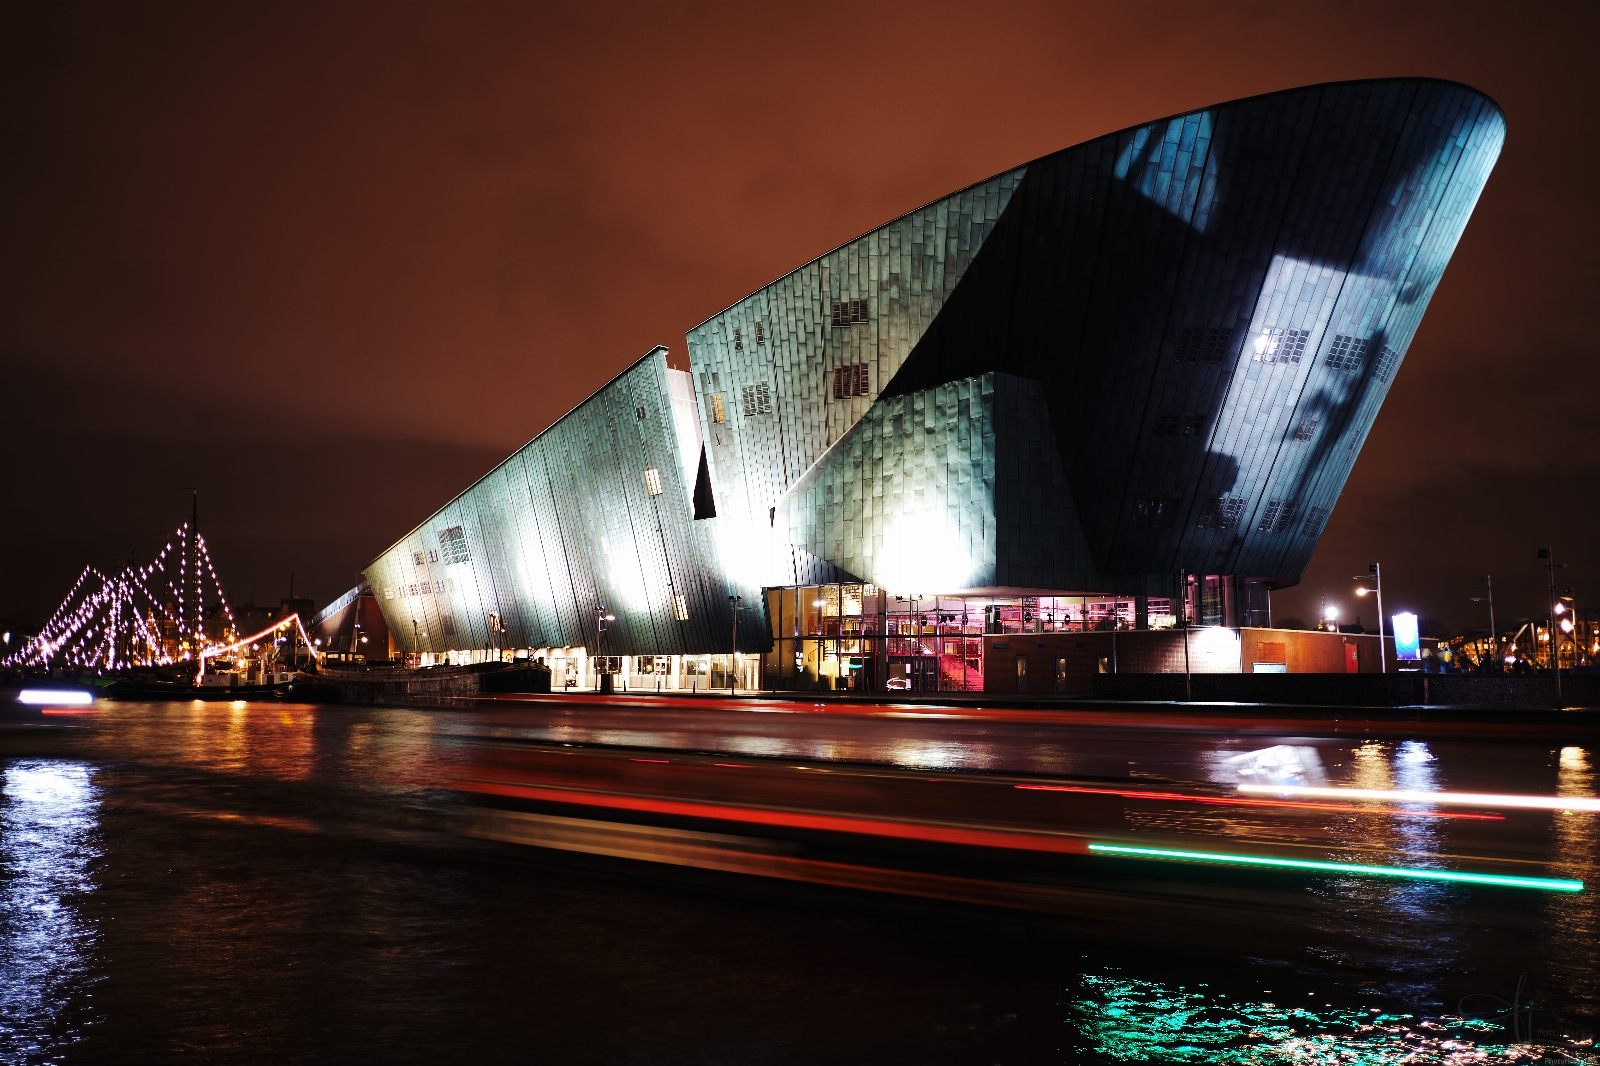 Image of NEMO Science Museum by Andries Jongsma